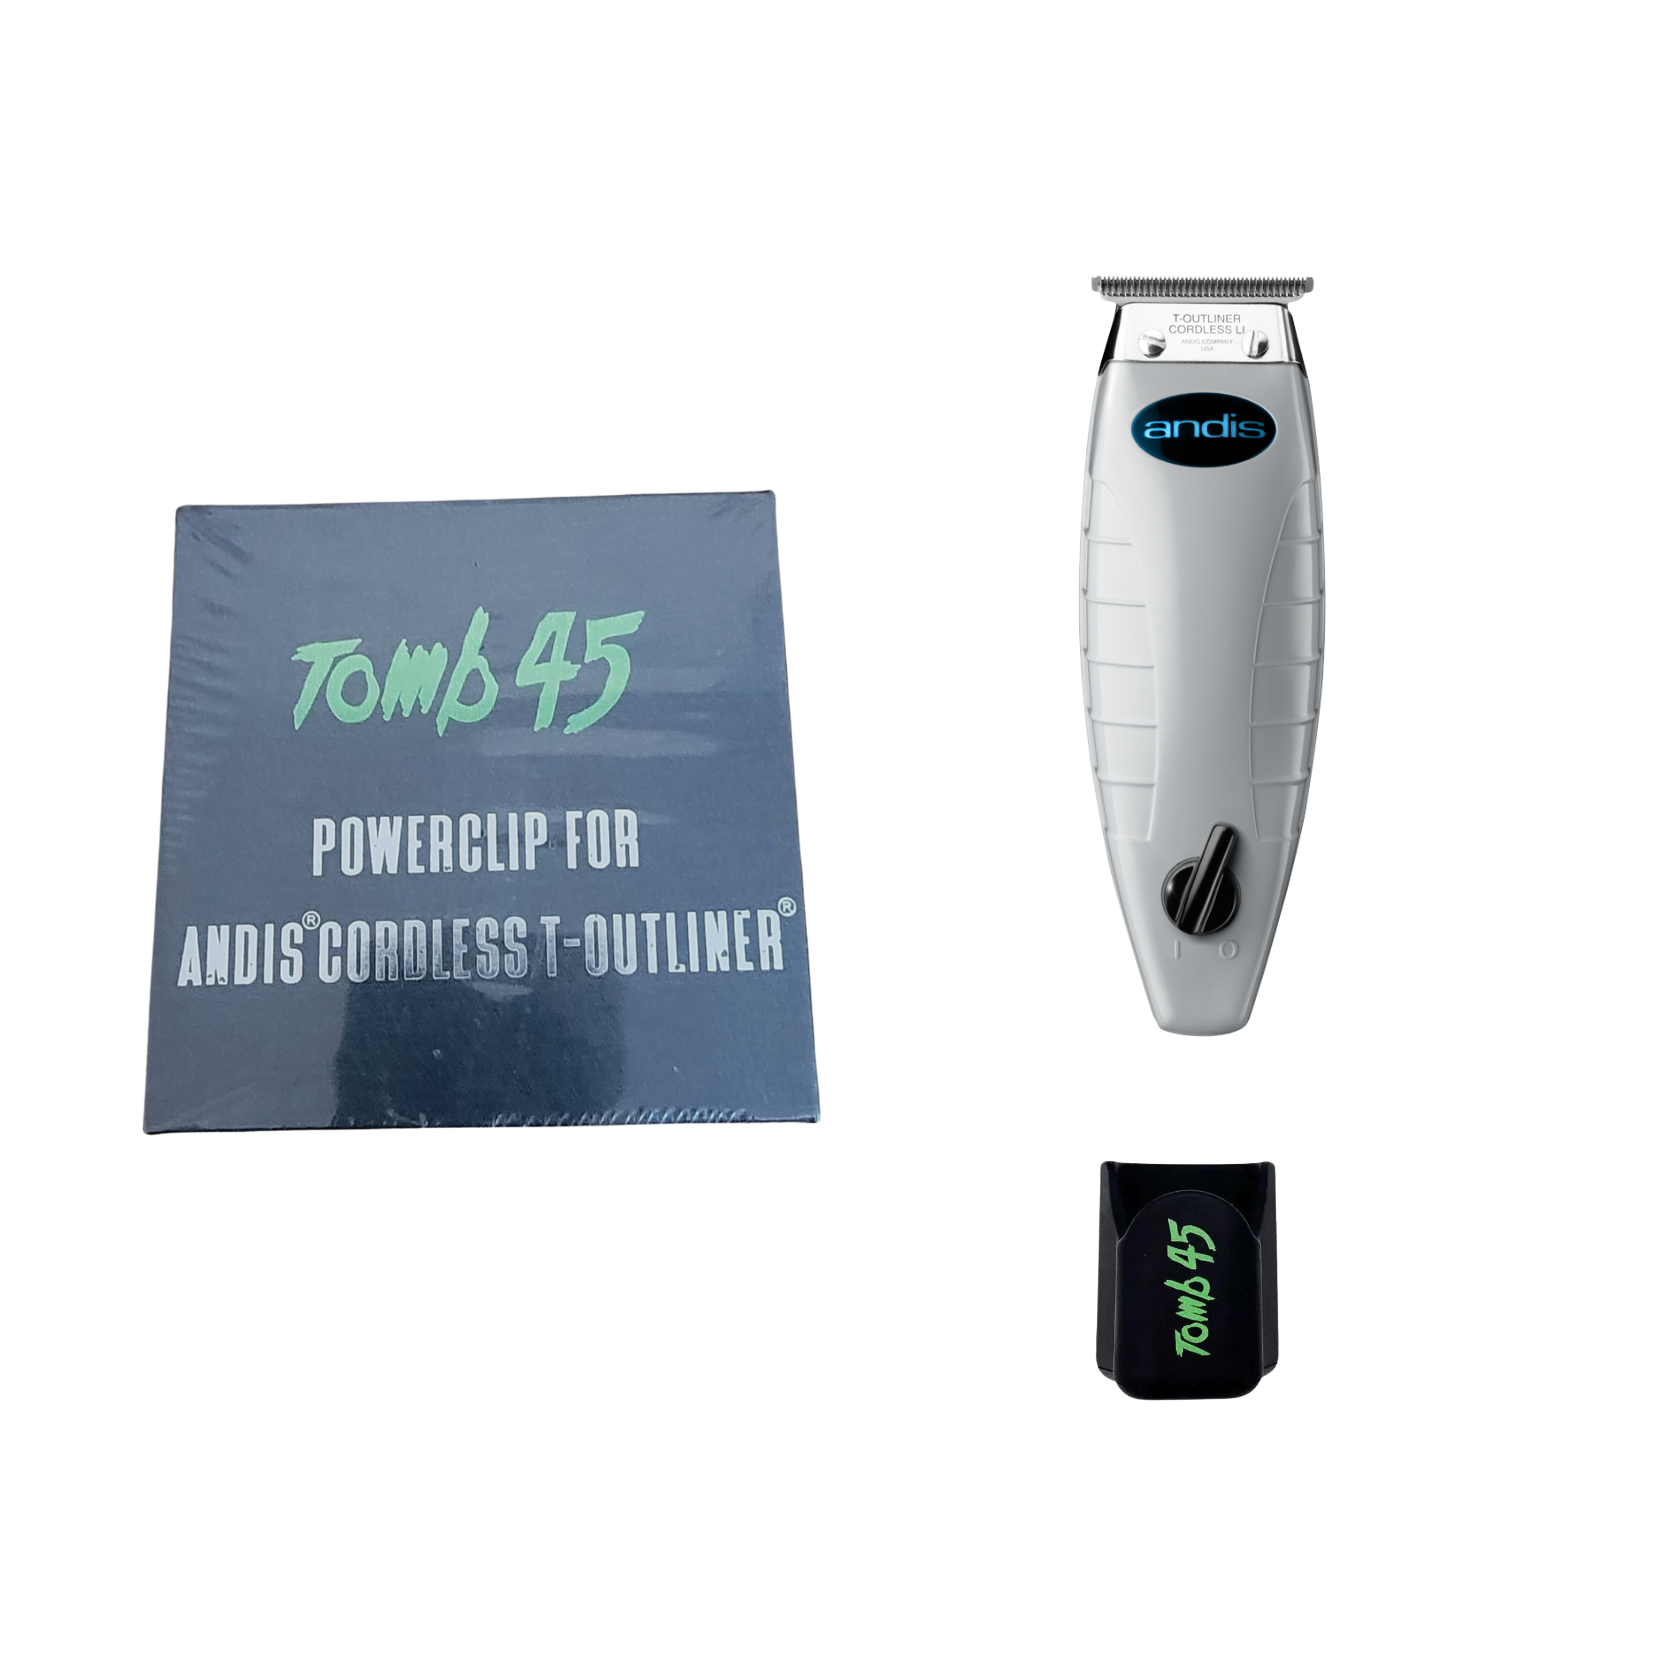 Tomb45 PowerClip fits Cordless Wahl senior - 2.0 edition for new charging  ports